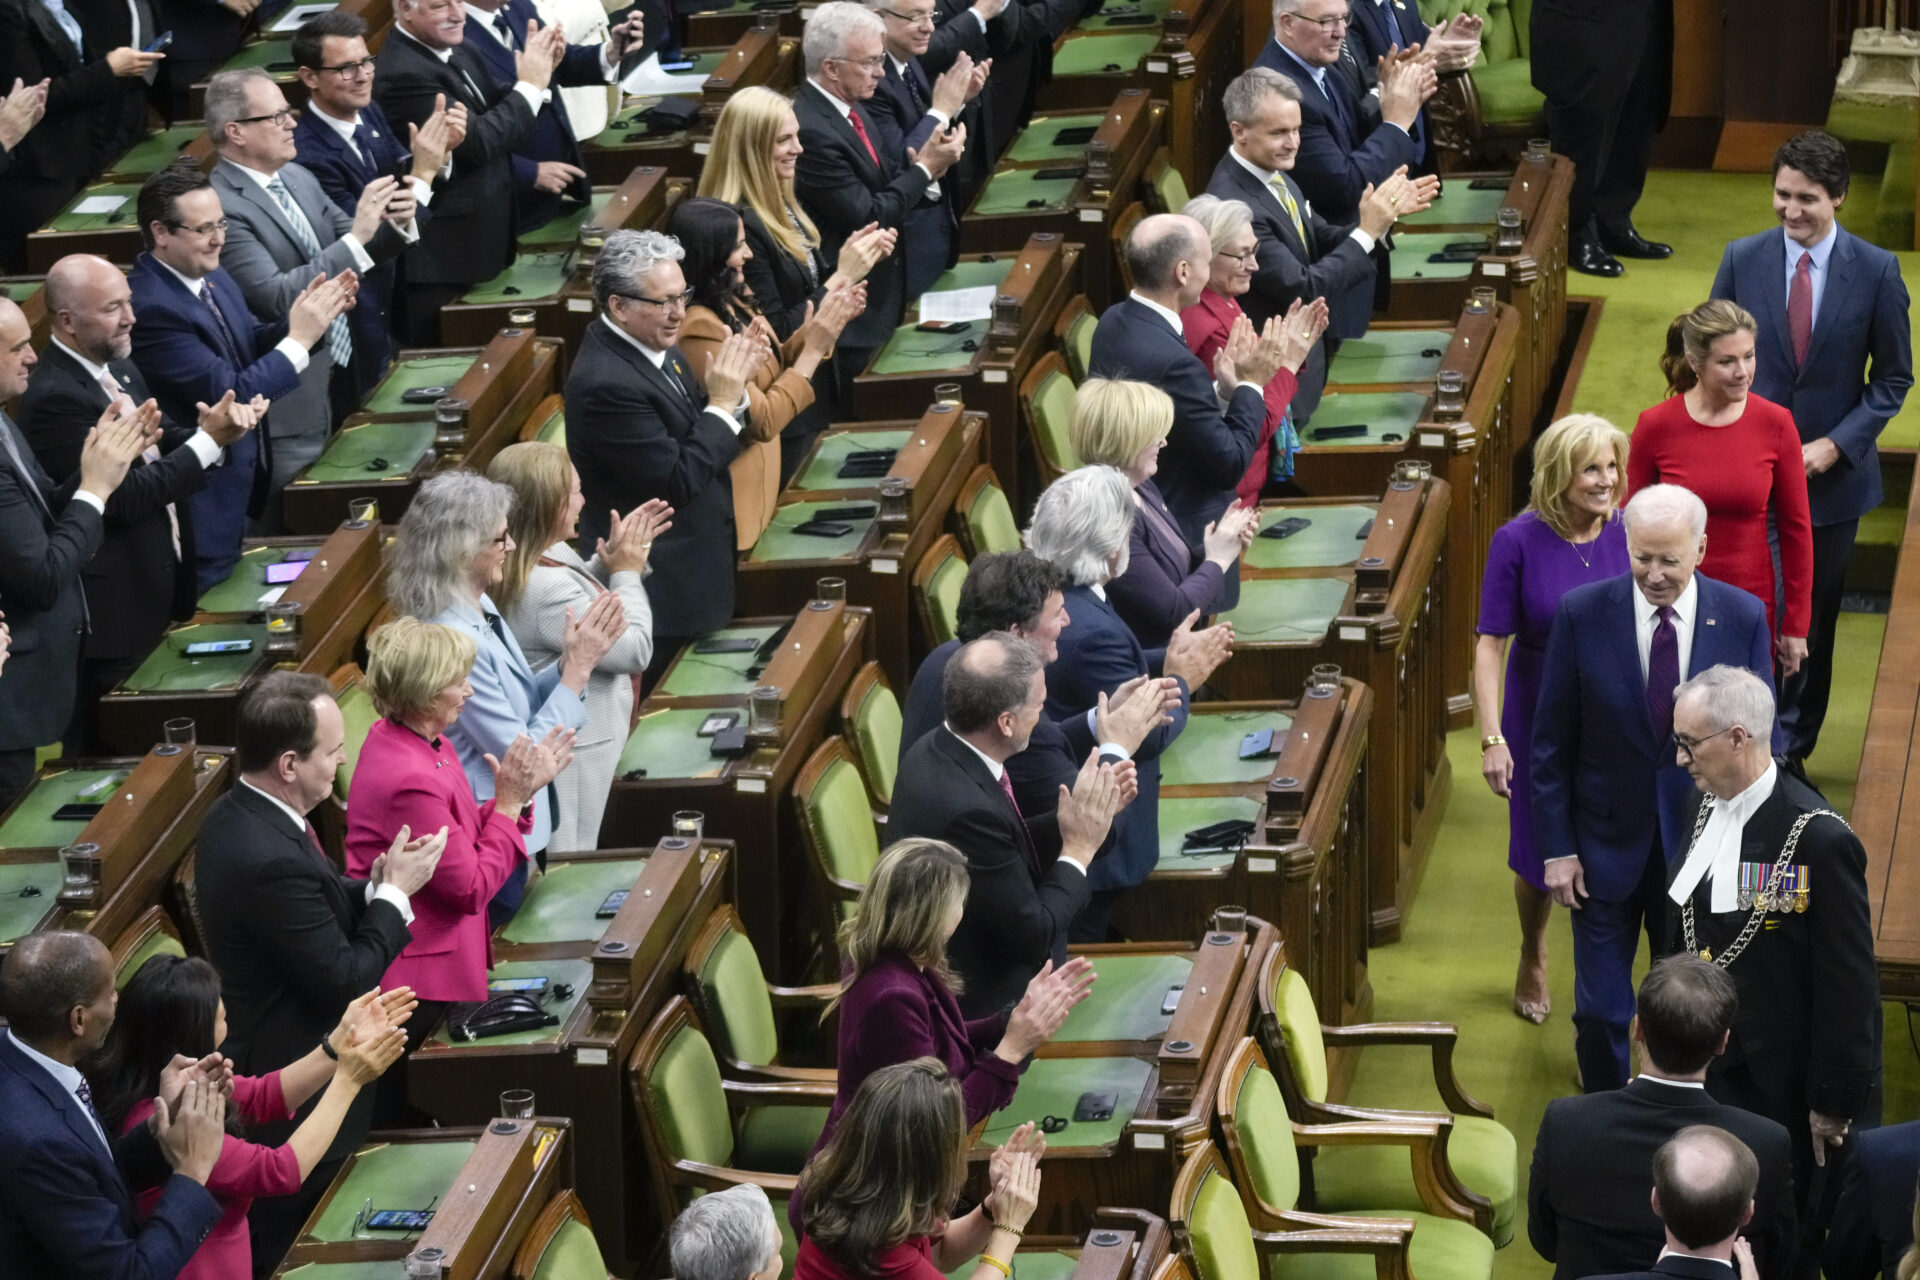 Four rows of MPs stand in their seats and applaud as Biden, Trudeau and their wives pass in front of them. The MPs are a mix of women and men, with the men in dark suits and the women wearing jackets in various colours, some pink, burgundy, powder blue. The floor is covered in an olive green carpet. The desks in front of each MP are wood with square green blotters. Each MP’s chair is wood with olive-green velvet backing and cushions. Most everyone is smiling. 